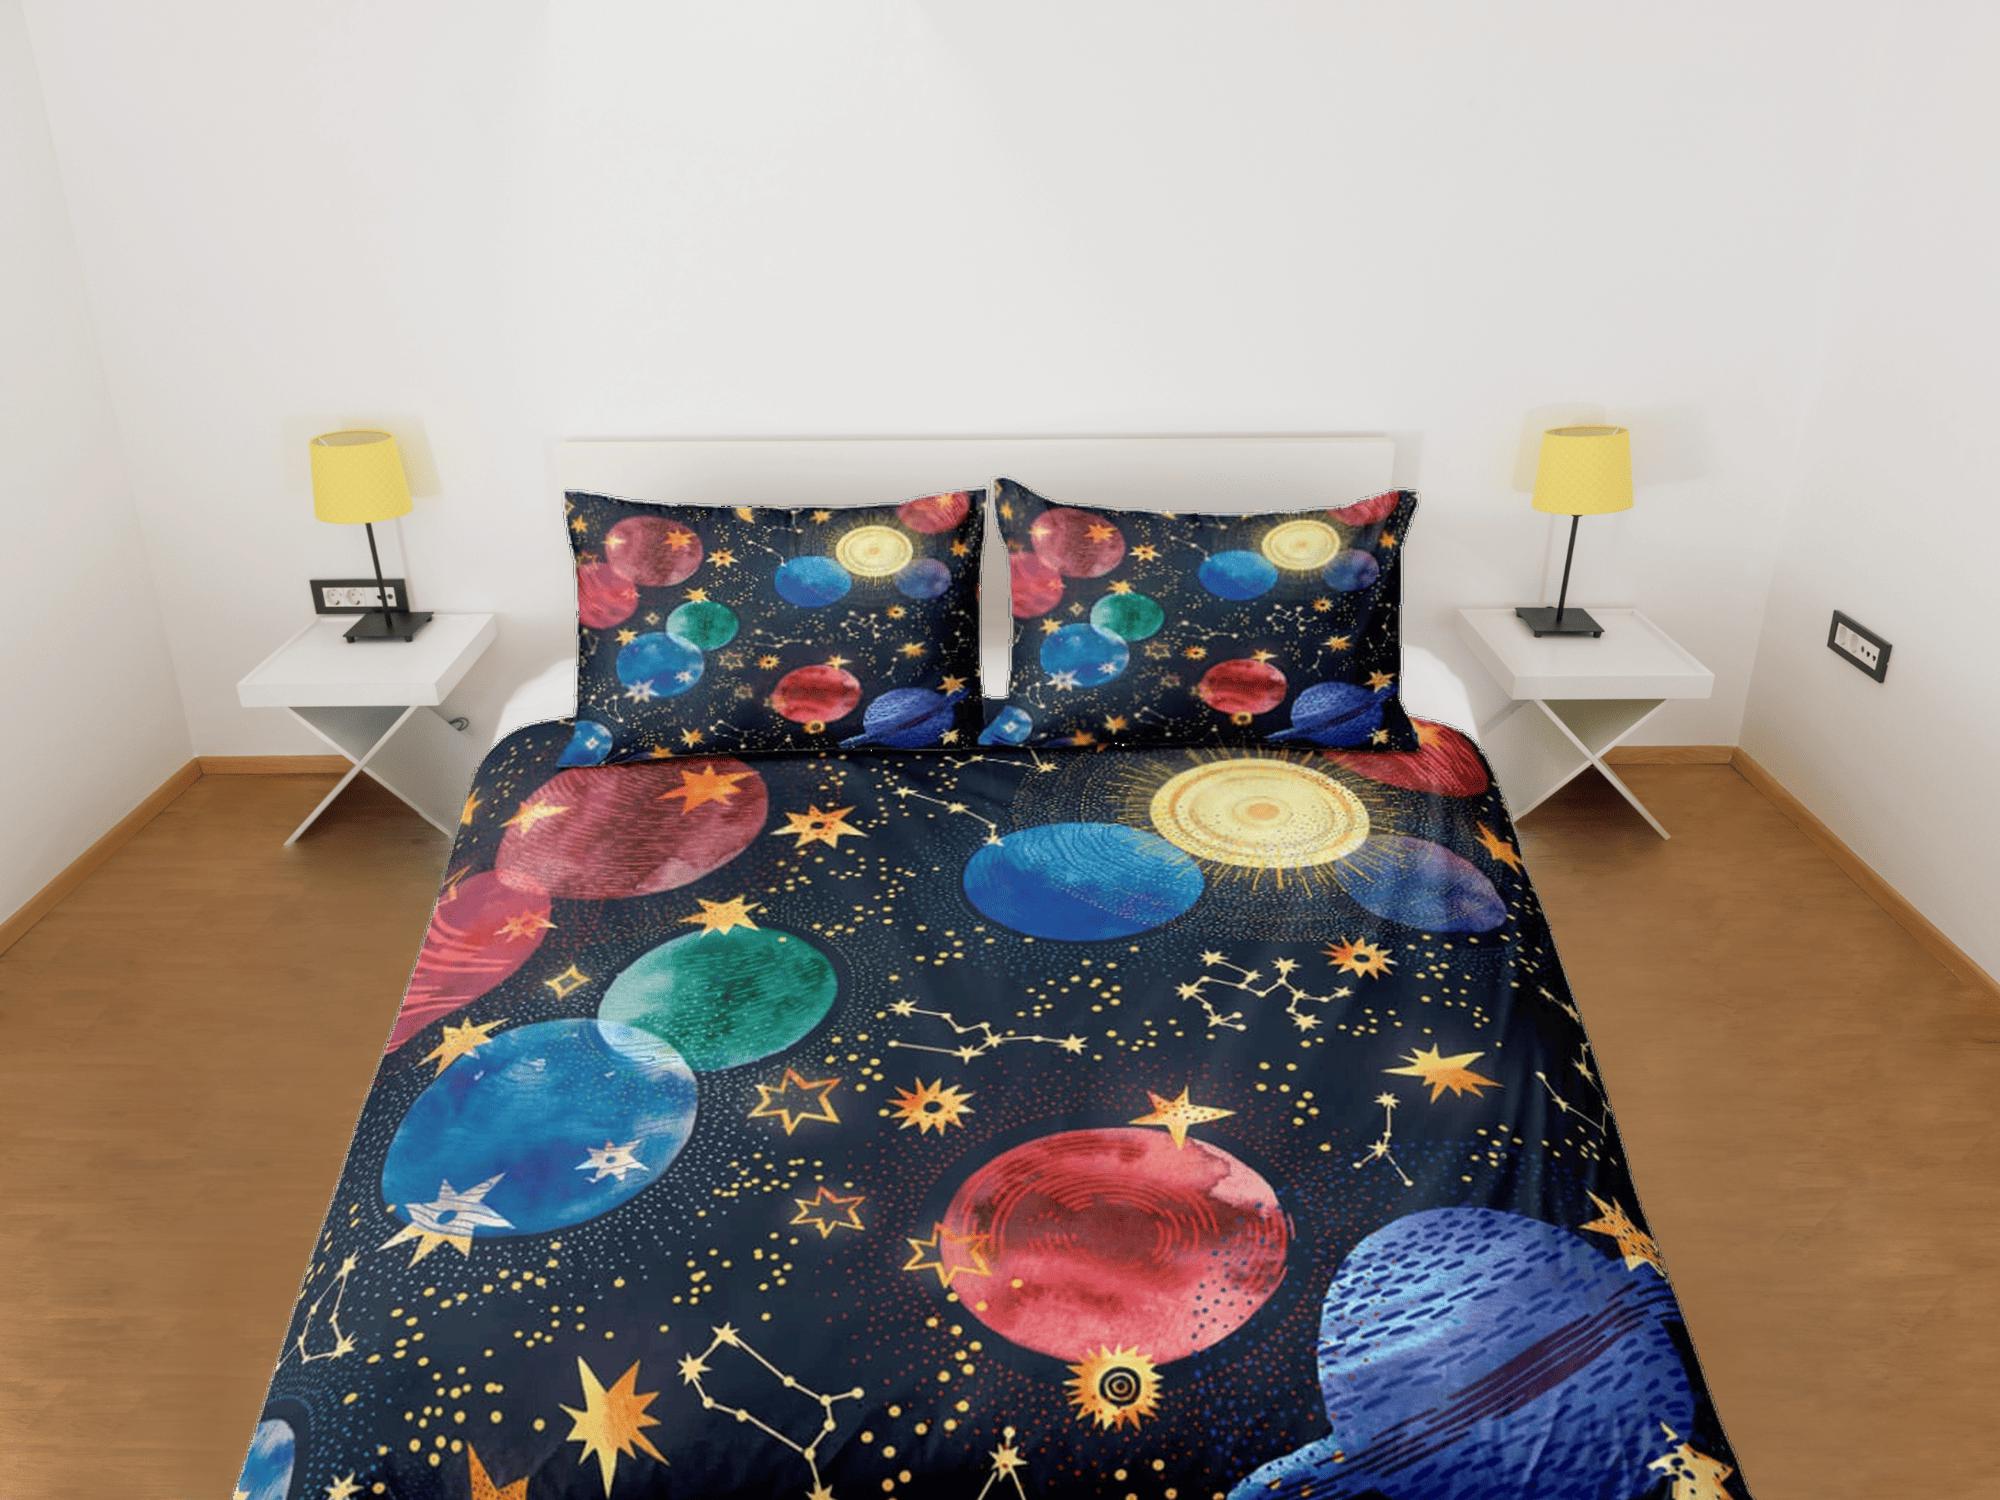 daintyduvet Colorful planets galaxy bedding, 3D outer space bedding set full, cosmic duvet cover king, queen, dorm bedding, toddler bedding aesthetic